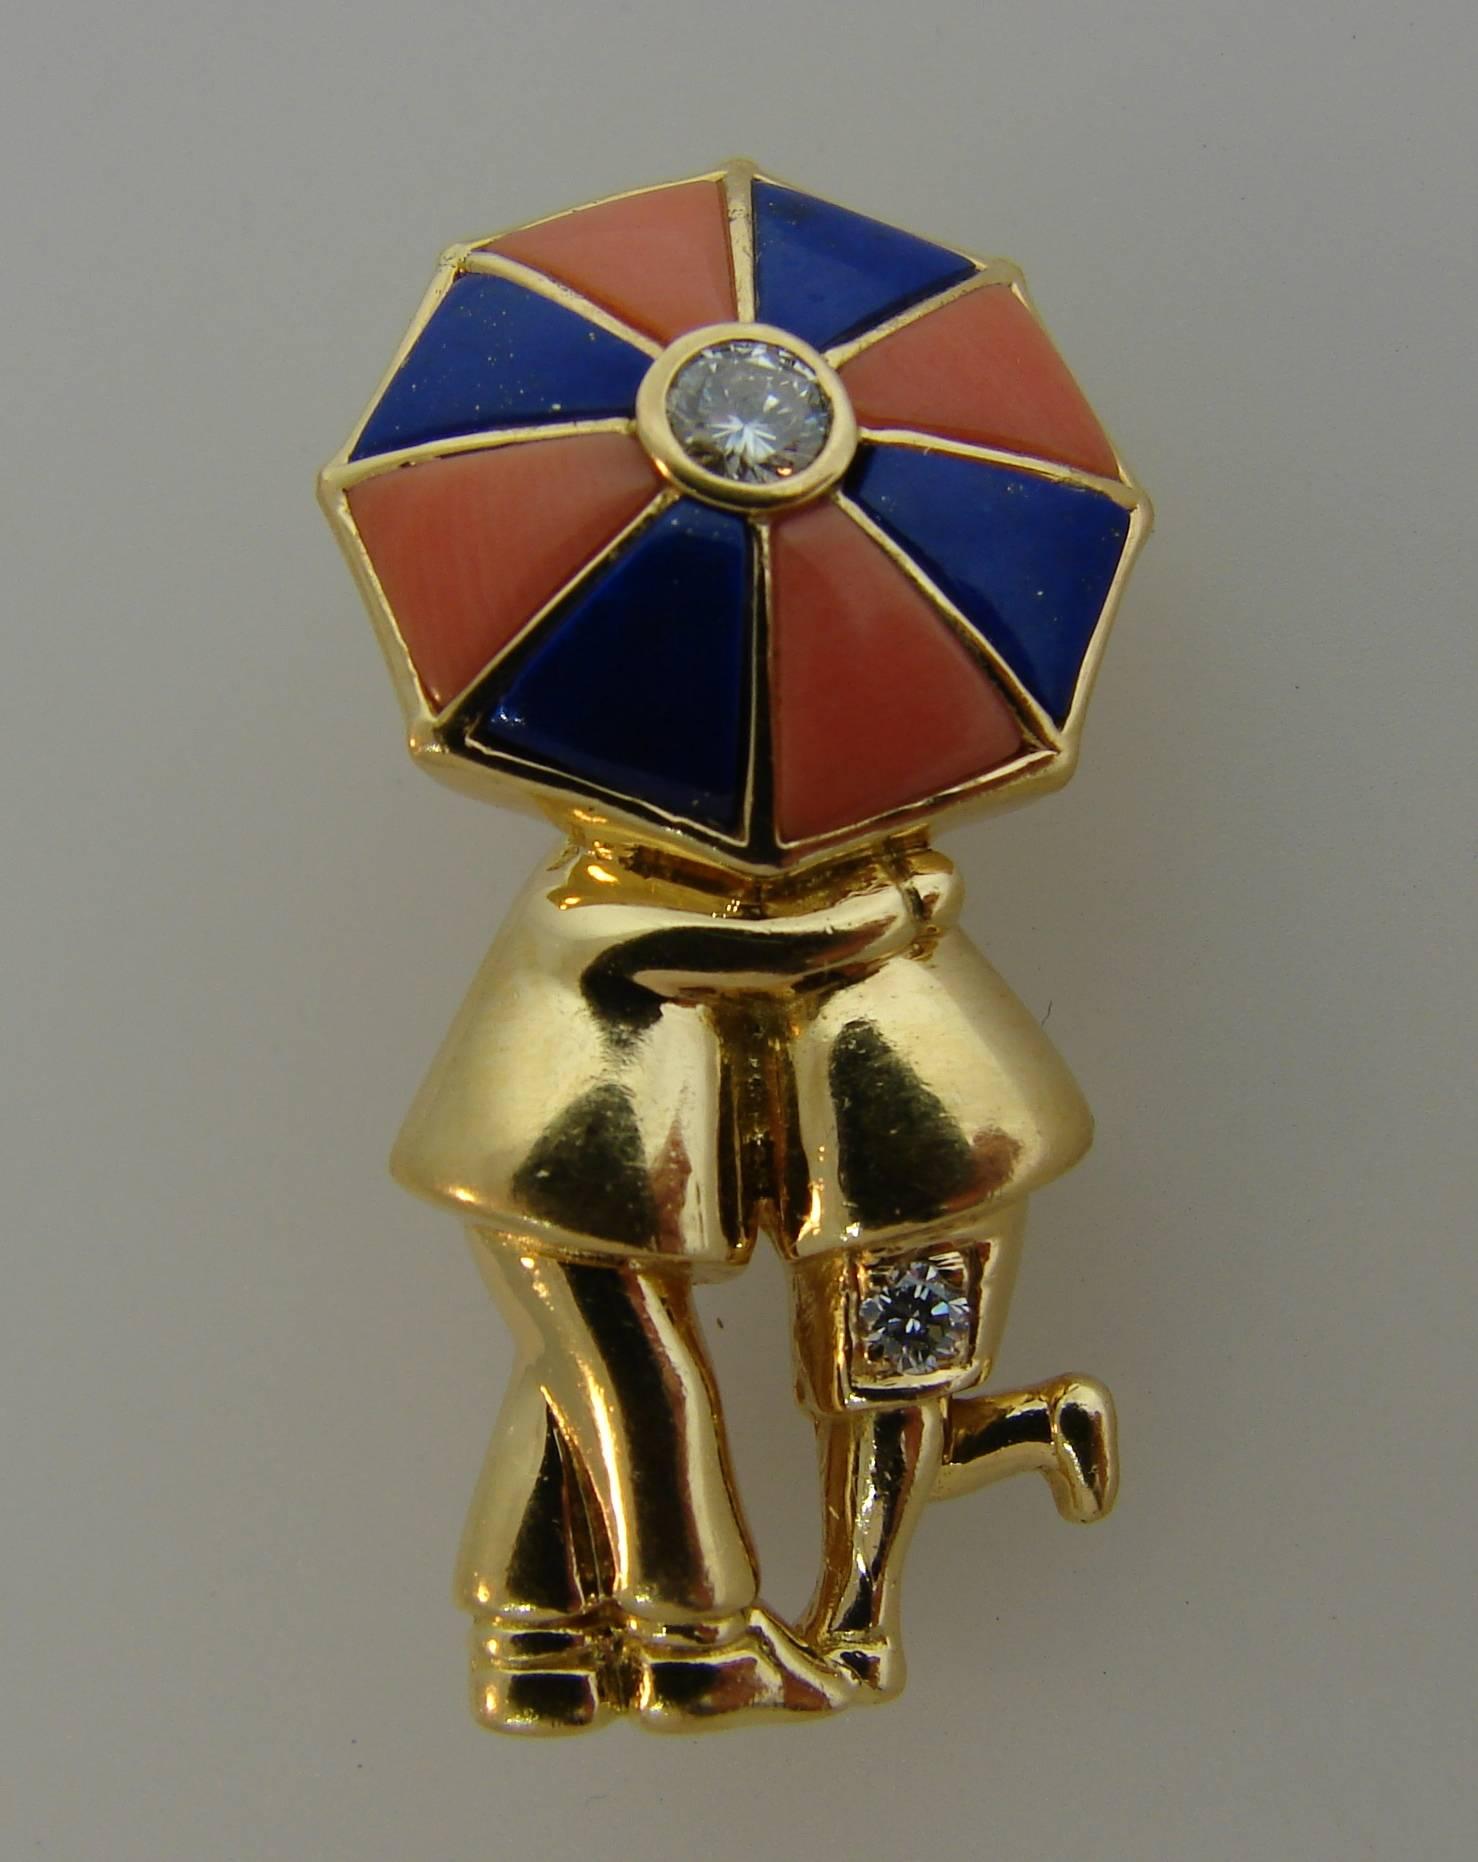 Cutest clip created by Van Cleef & Arpels in France in the 1950's. Adorable, chic and wearable, the pin is a great addition to your jewelry collection. It makes a tasteful accent to any outfit.
The clip is made of 18 karat yellow gold, coral, lapis